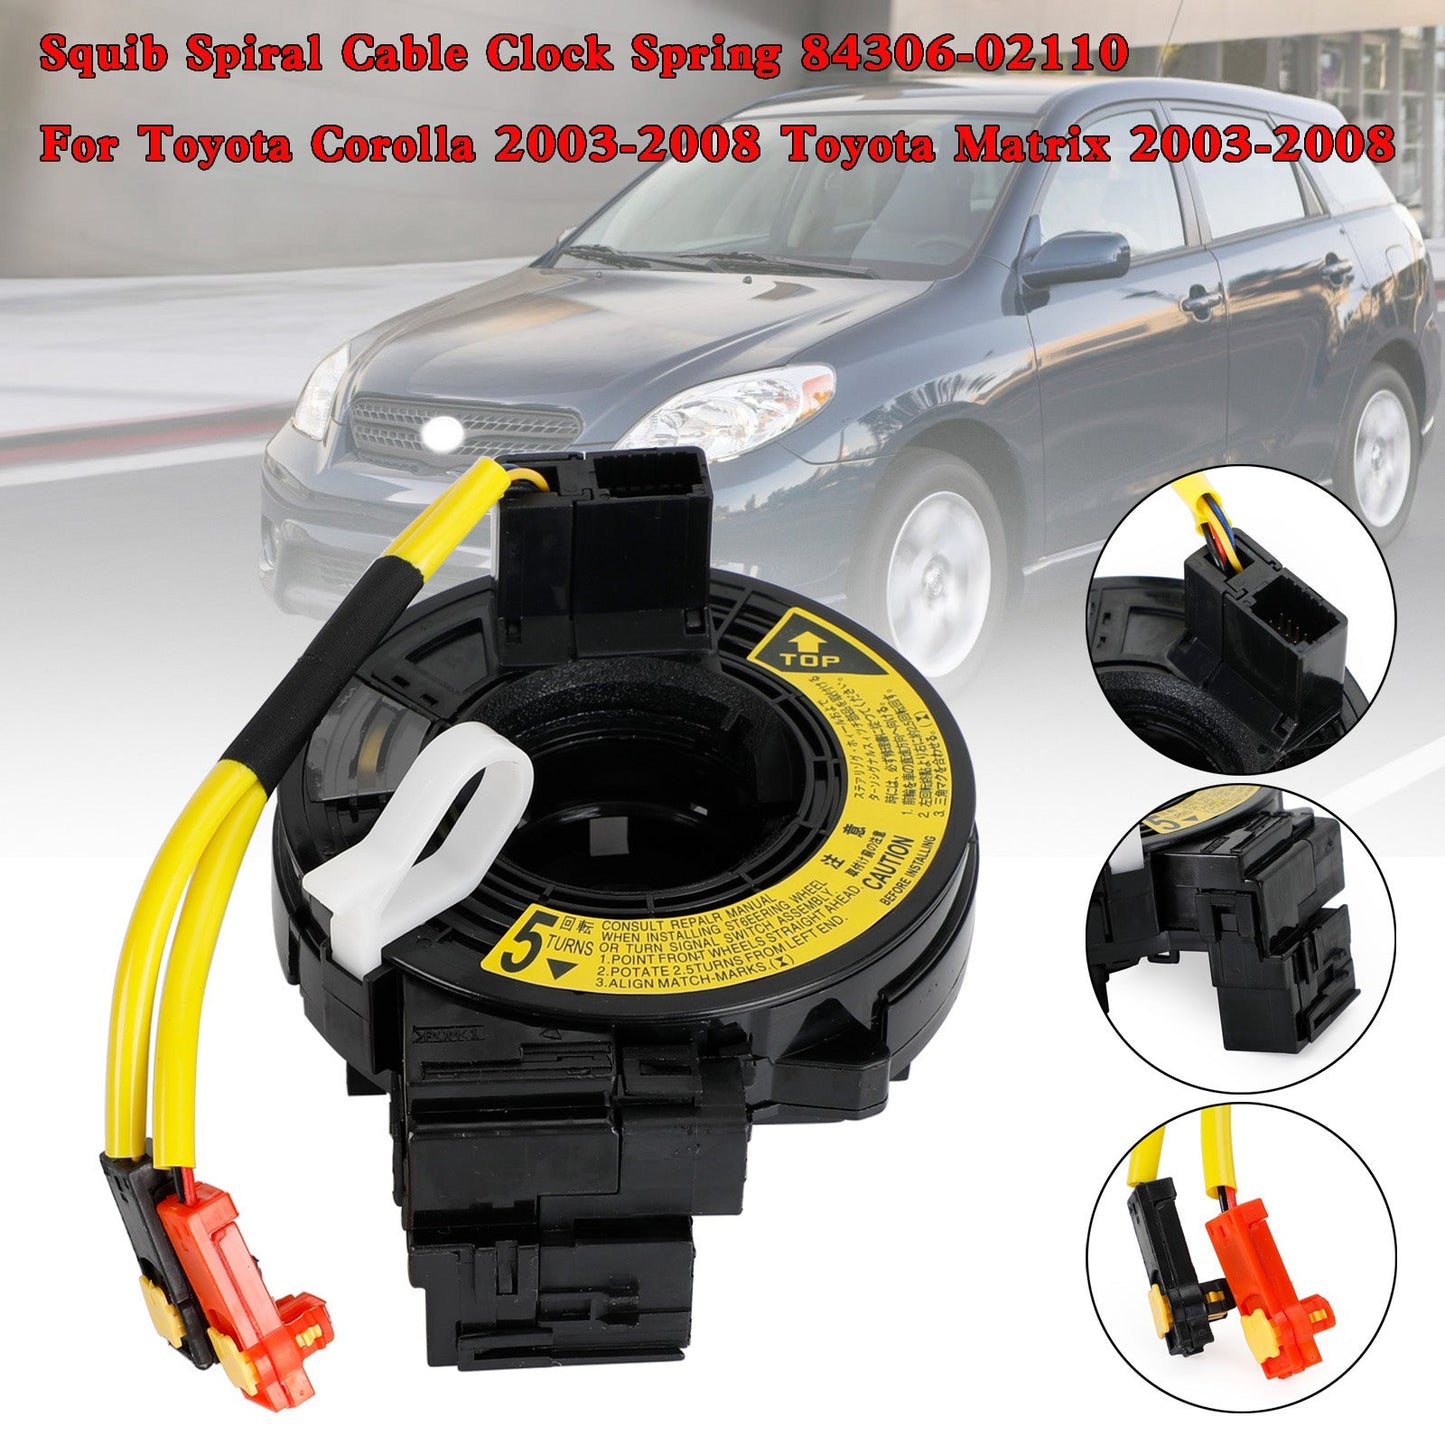 Squib Spiral Cable Clock Spring 84306-02110 For Toyota Corolla 2003-2008